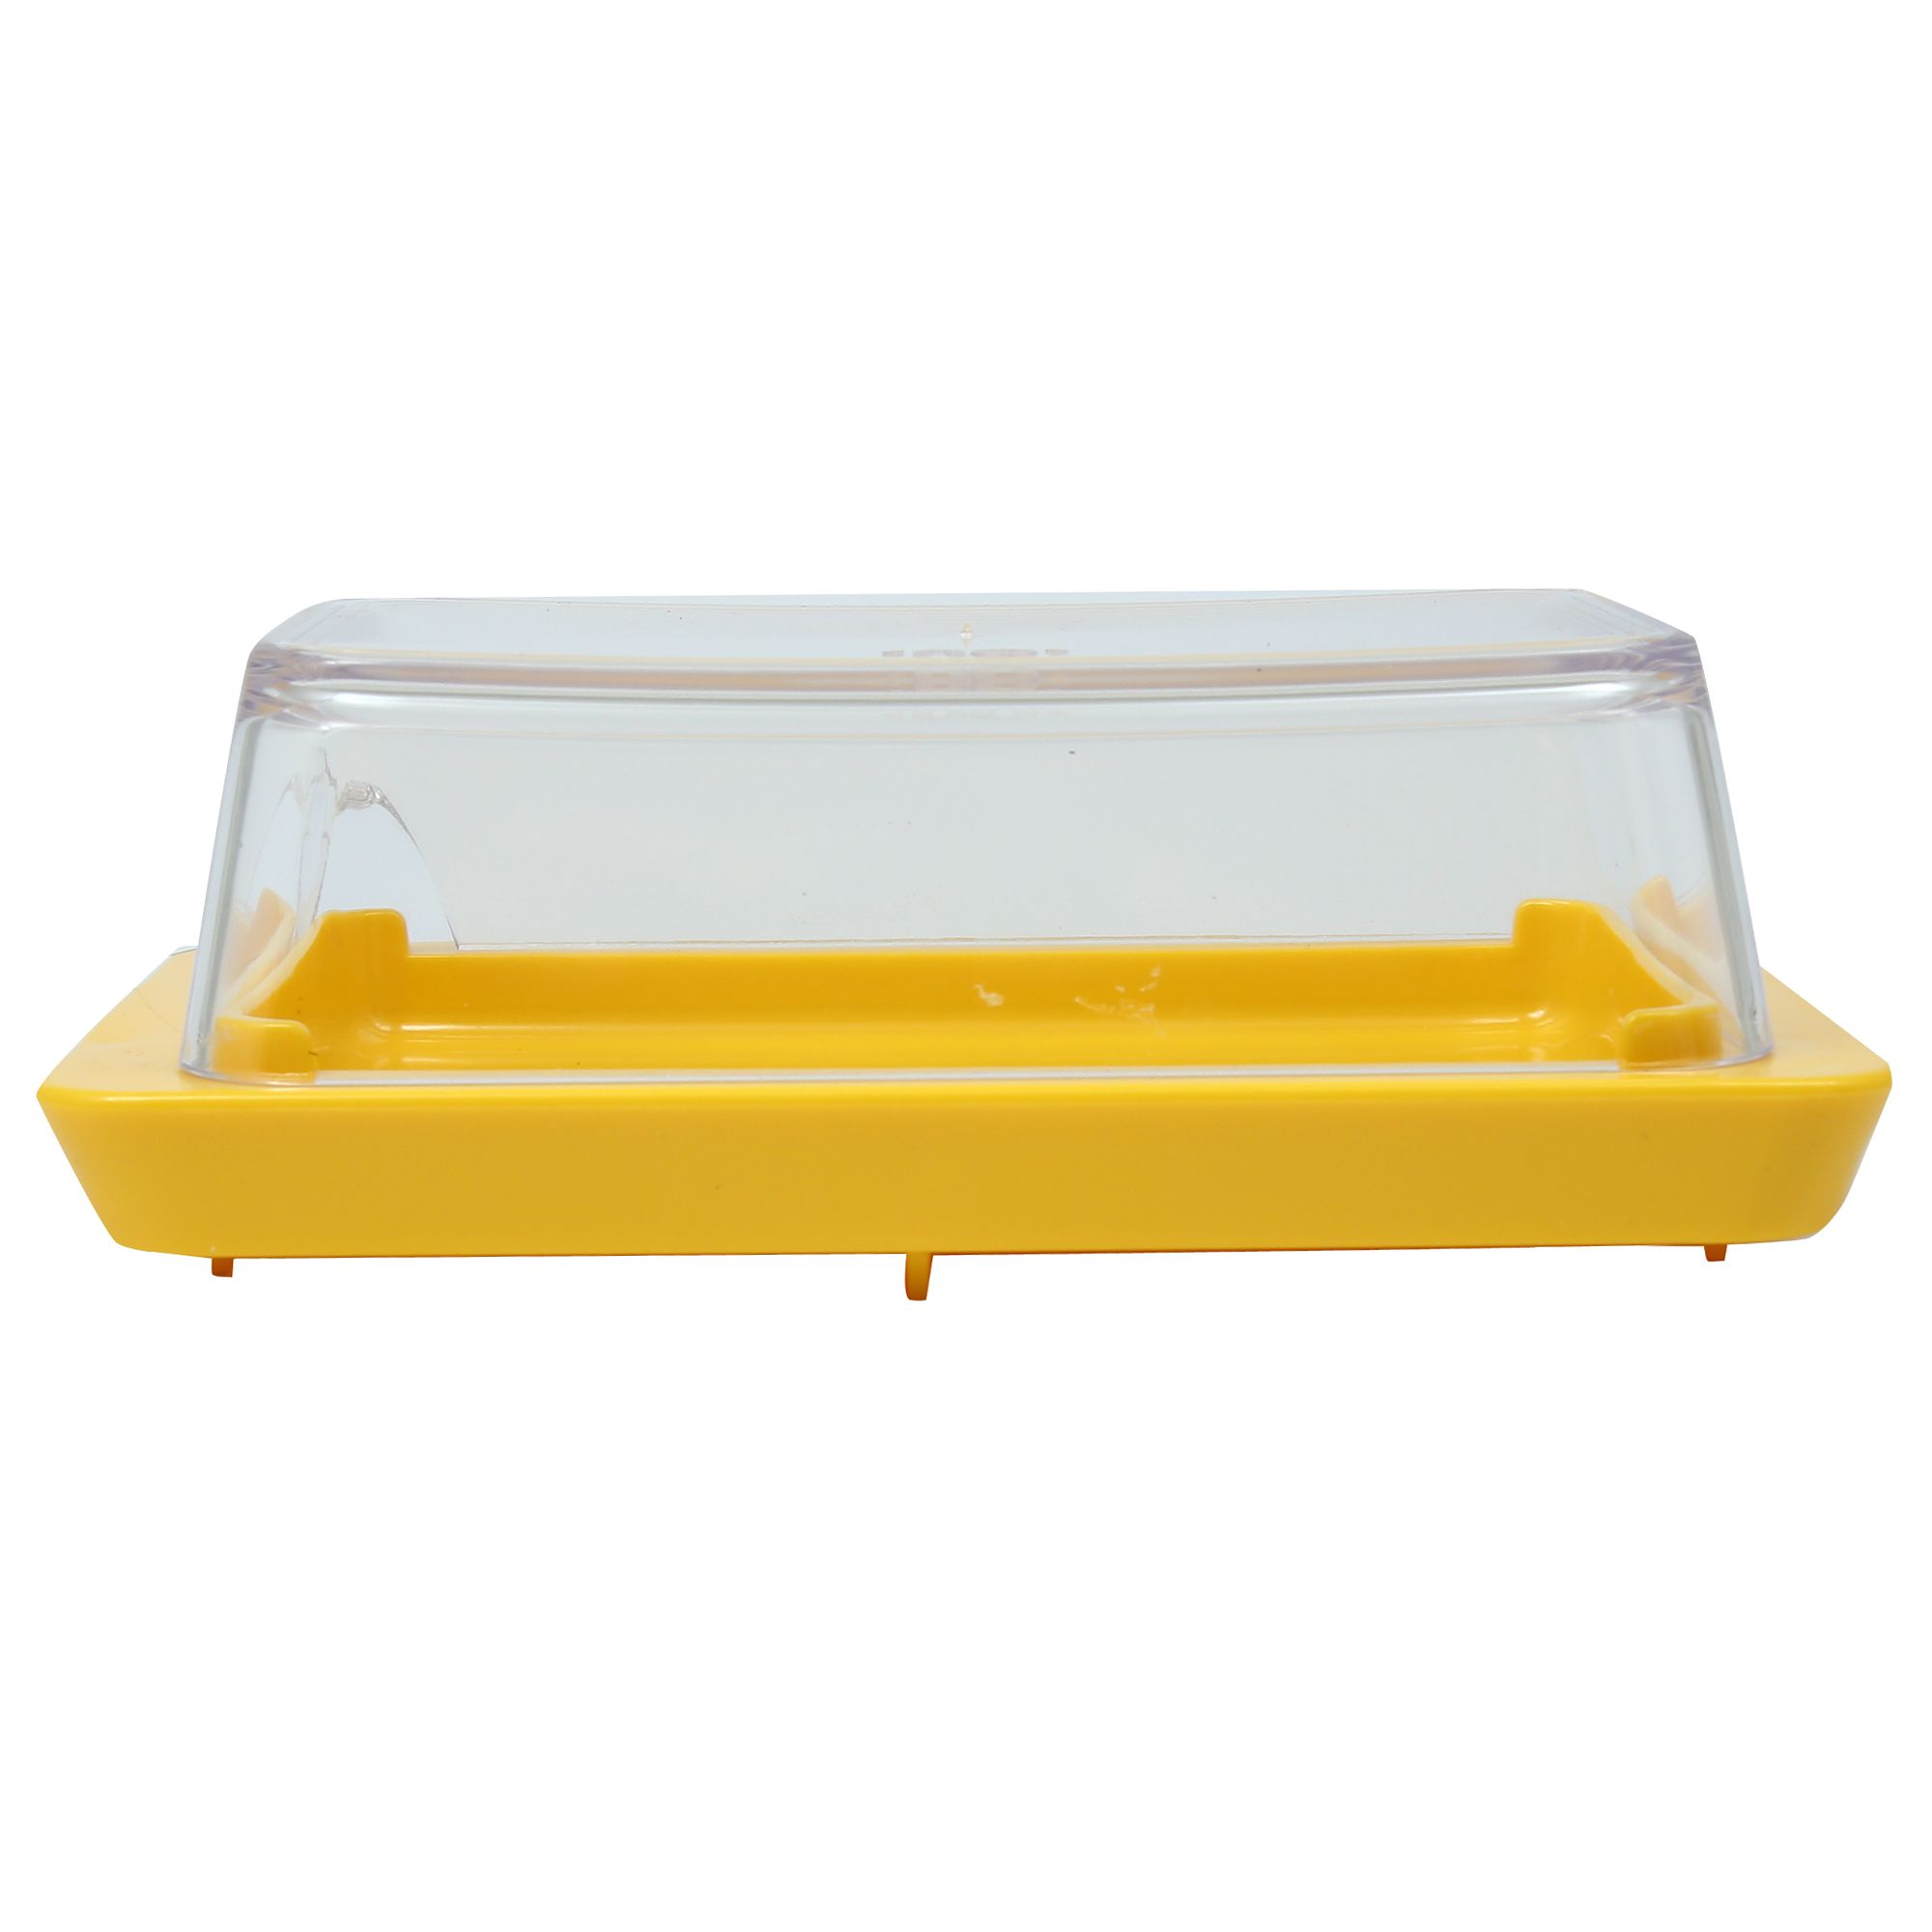 OU VITRA Butter Cheese Storage Container Dish Tray with ...